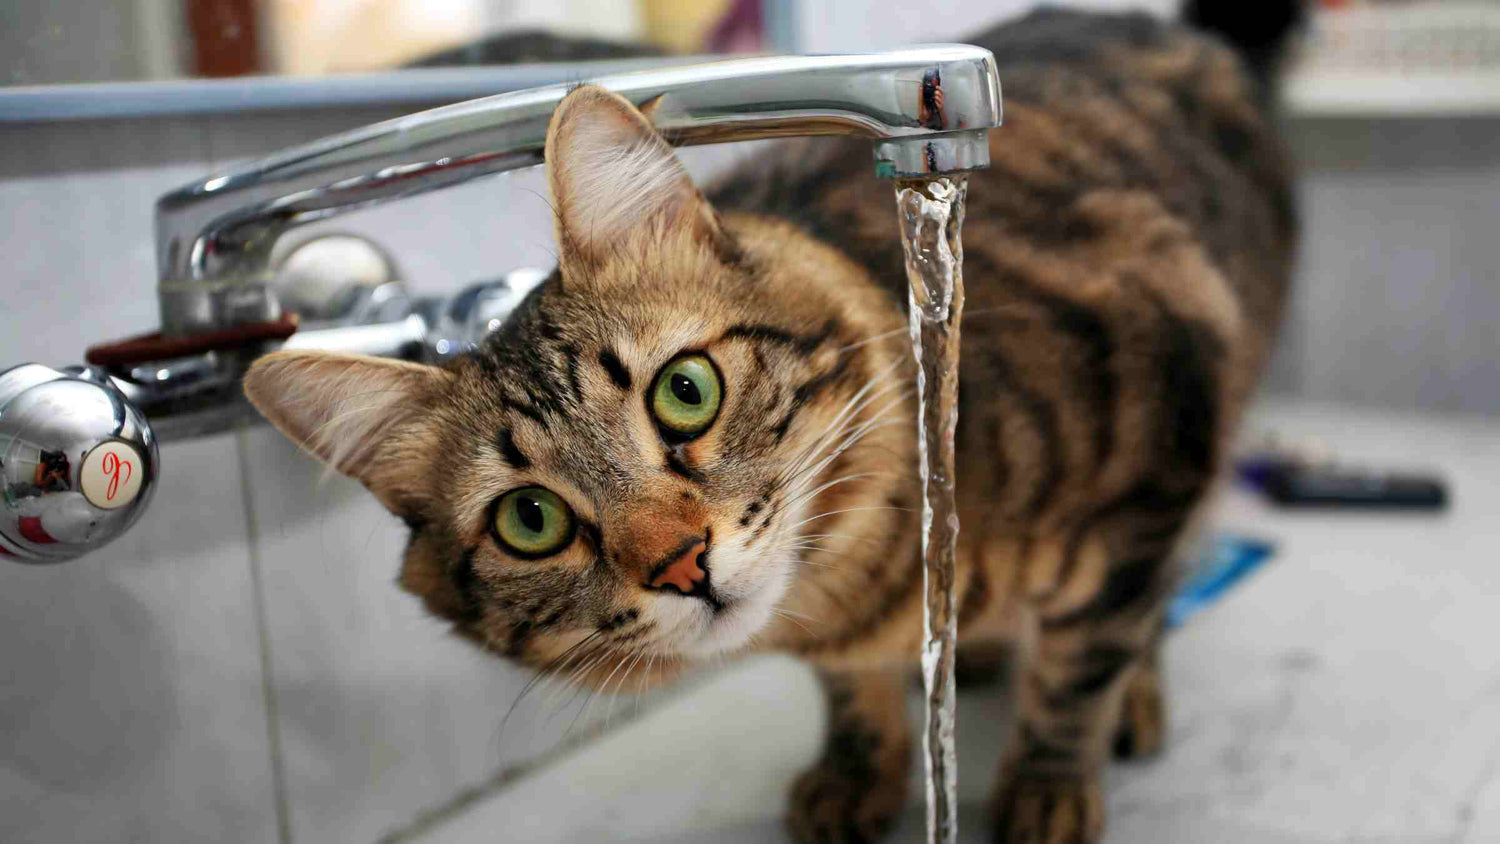 Tabby cat drinking from a running faucet, illustrating practical cat hydration tips for summer.